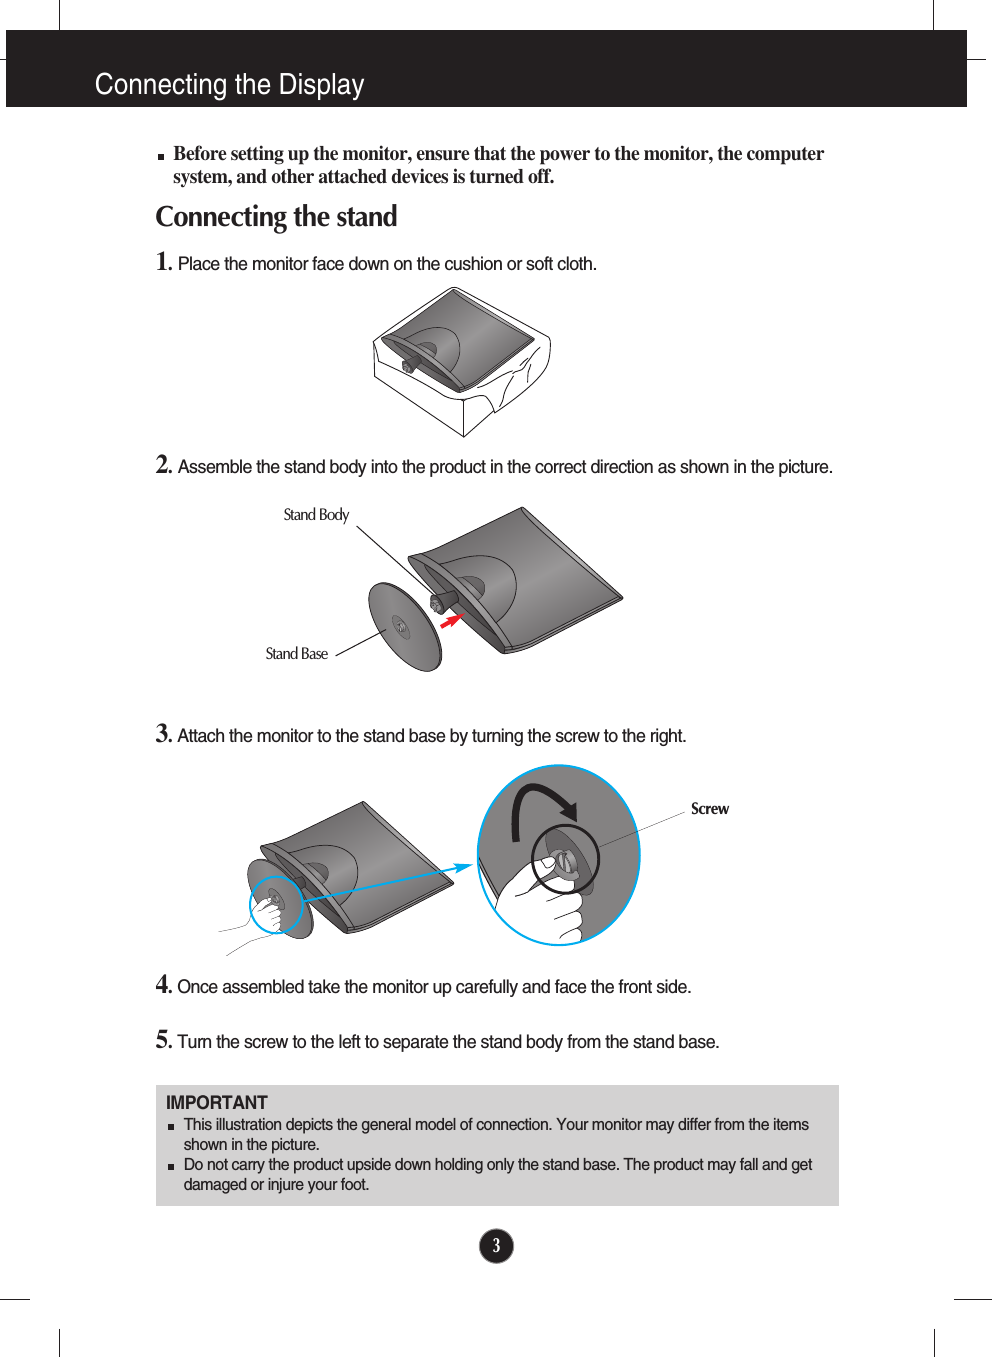 3Connecting the DisplayIMPORTANTThis illustration depicts the general model of connection. Your monitor may differ from the itemsshown in the picture.Do not carry the product upside down holding only the stand base. The product may fall and getdamaged or injure your foot.Before setting up the monitor, ensure that the power to the monitor, the computersystem, and other attached devices is turned off.Connecting the stand 1.Place the monitor face down on the cushion or soft cloth.3.Attach the monitor to the stand base by turning the screw to the right.5.Turn the screw to the left to separate the stand body from the stand base. 4.Once assembled take the monitor up carefully and face the front side.Stand BaseStand BodyScrew2.Assemble the stand body into the product in the correct direction as shown in the picture. 